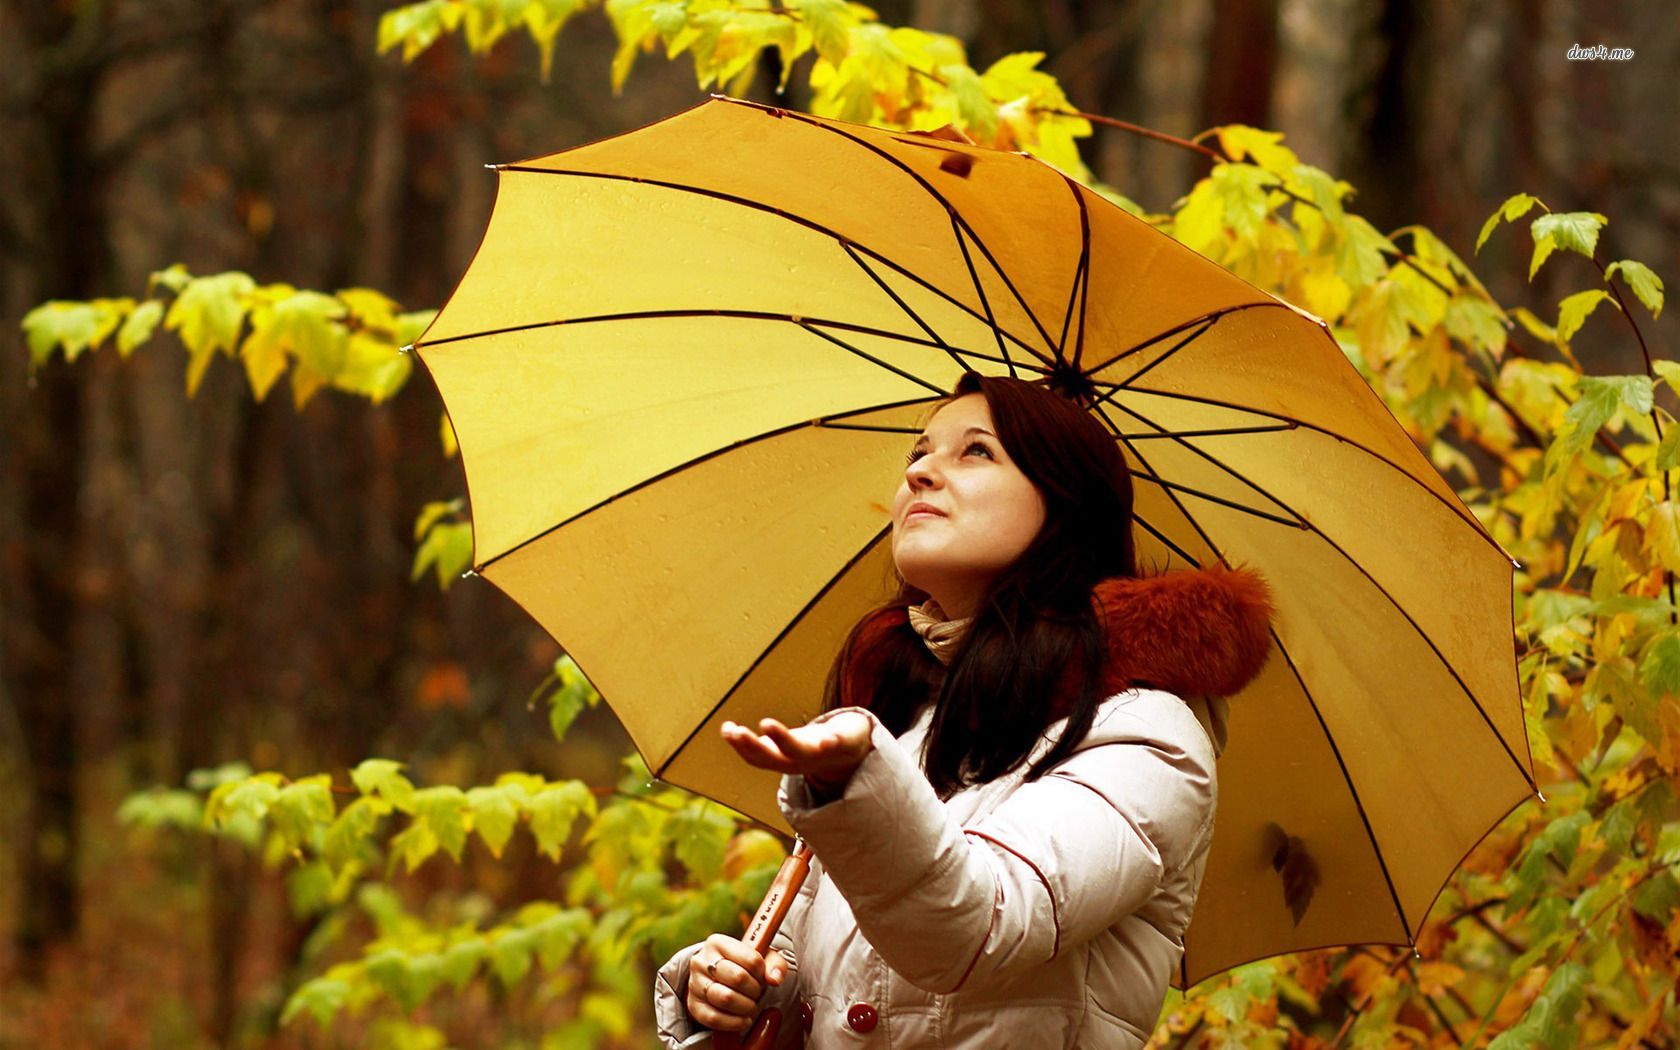 Girl with a yellow umbrella under the autumn rain HD wallpaper. Yellow umbrella, Autumn rain, Umbrella